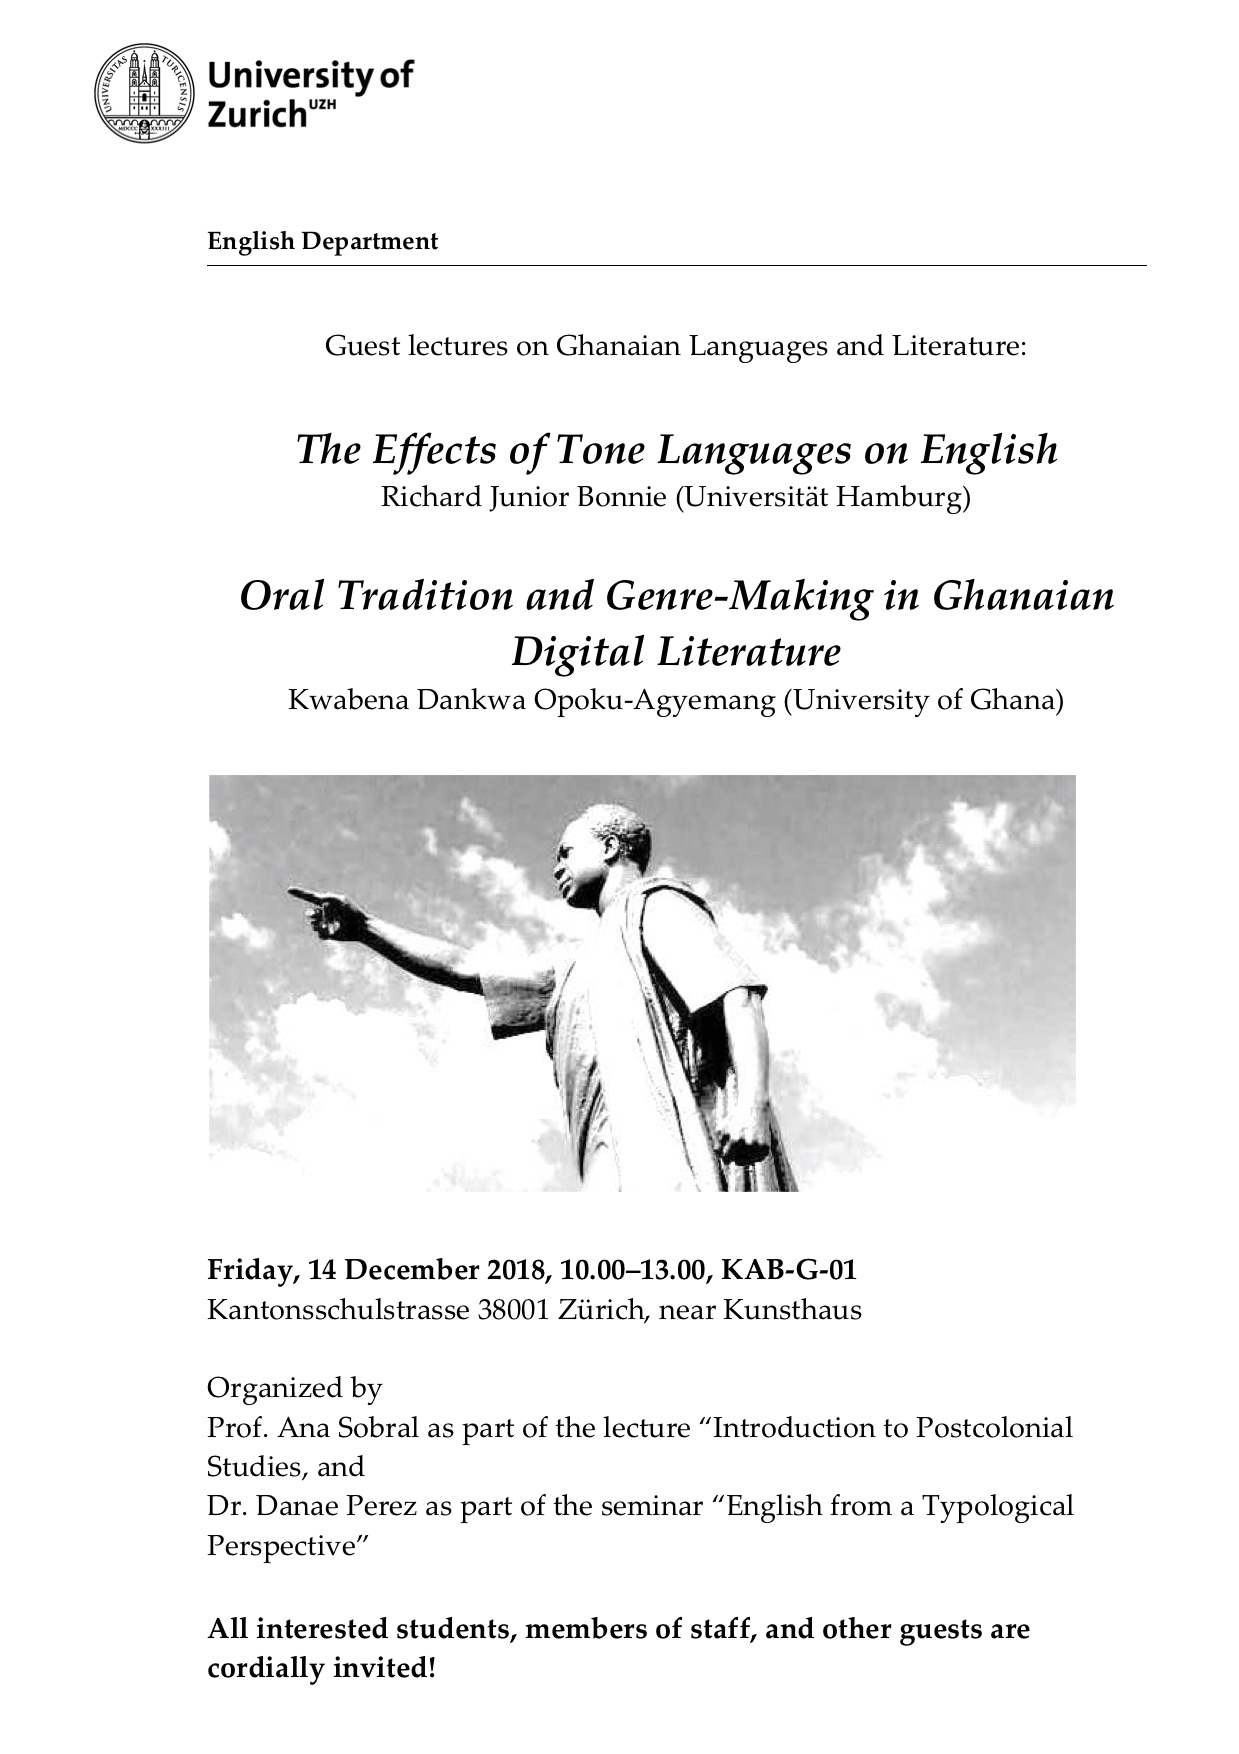 Guest lectures on Ghanaian Languages and Literature